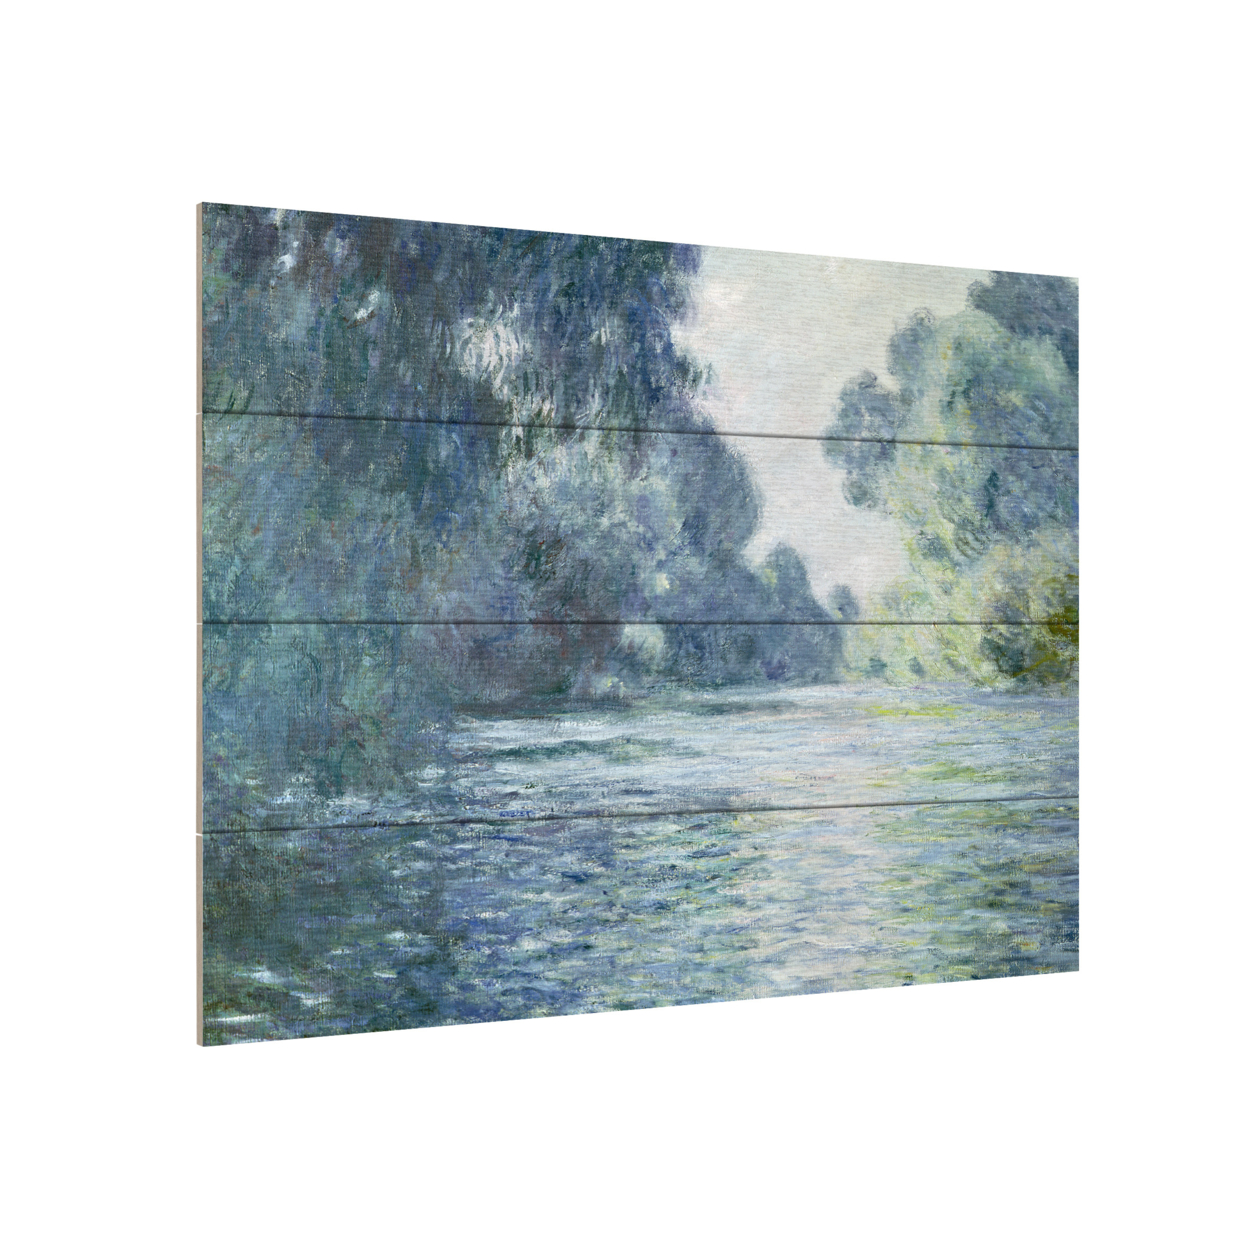 Wall Art 12 X 16 Inches Titled Branch Of The Seine Ready To Hang Printed On Wooden Planks